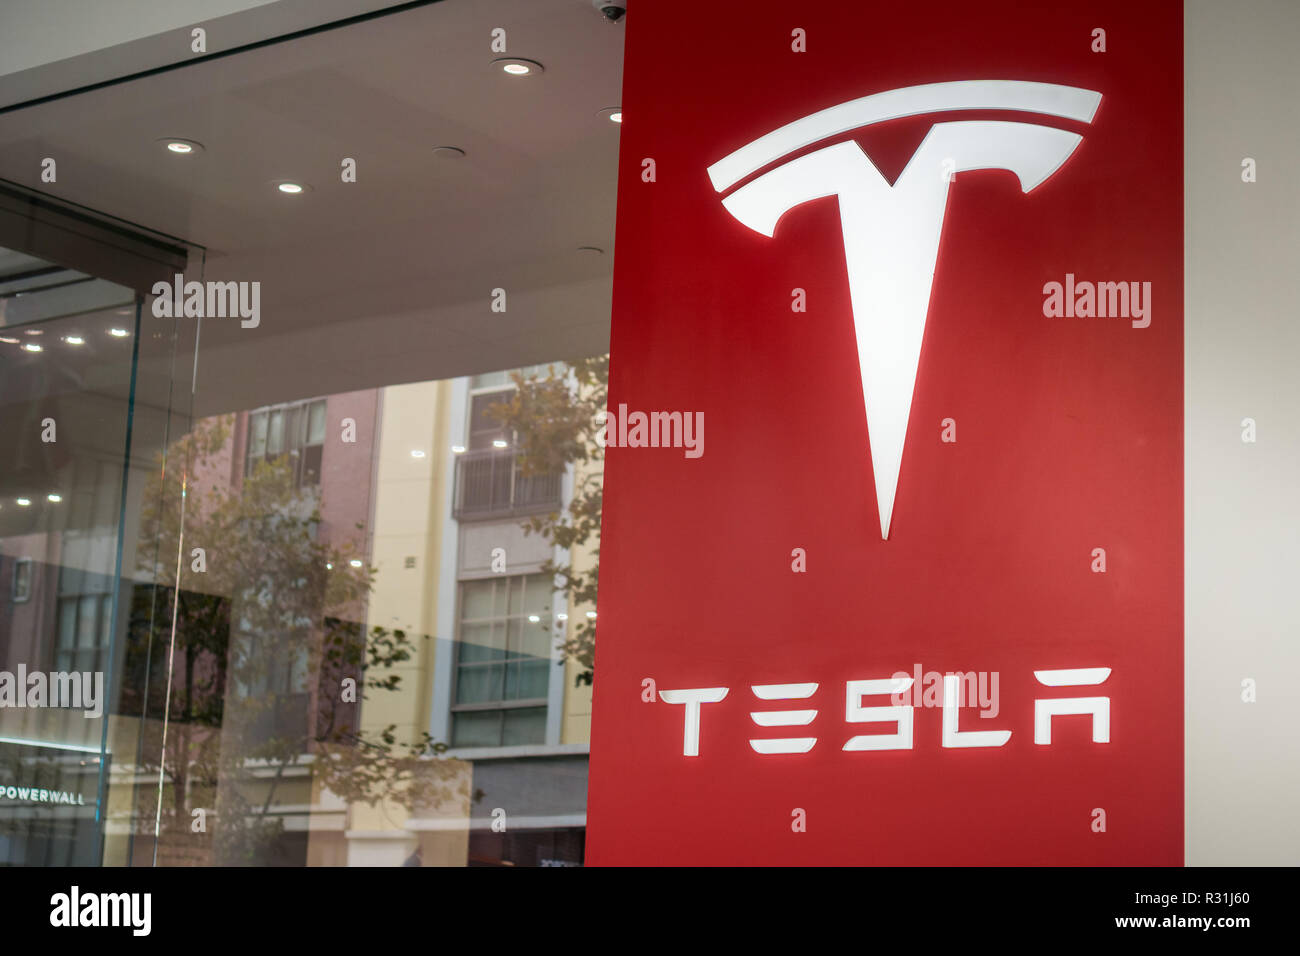 November 8, 2017 San Jose/Ca/USA Tesla logo on the window front of the showroom located in Santana Row shopping district, Silicon Valley, San Francisc Stock Photo